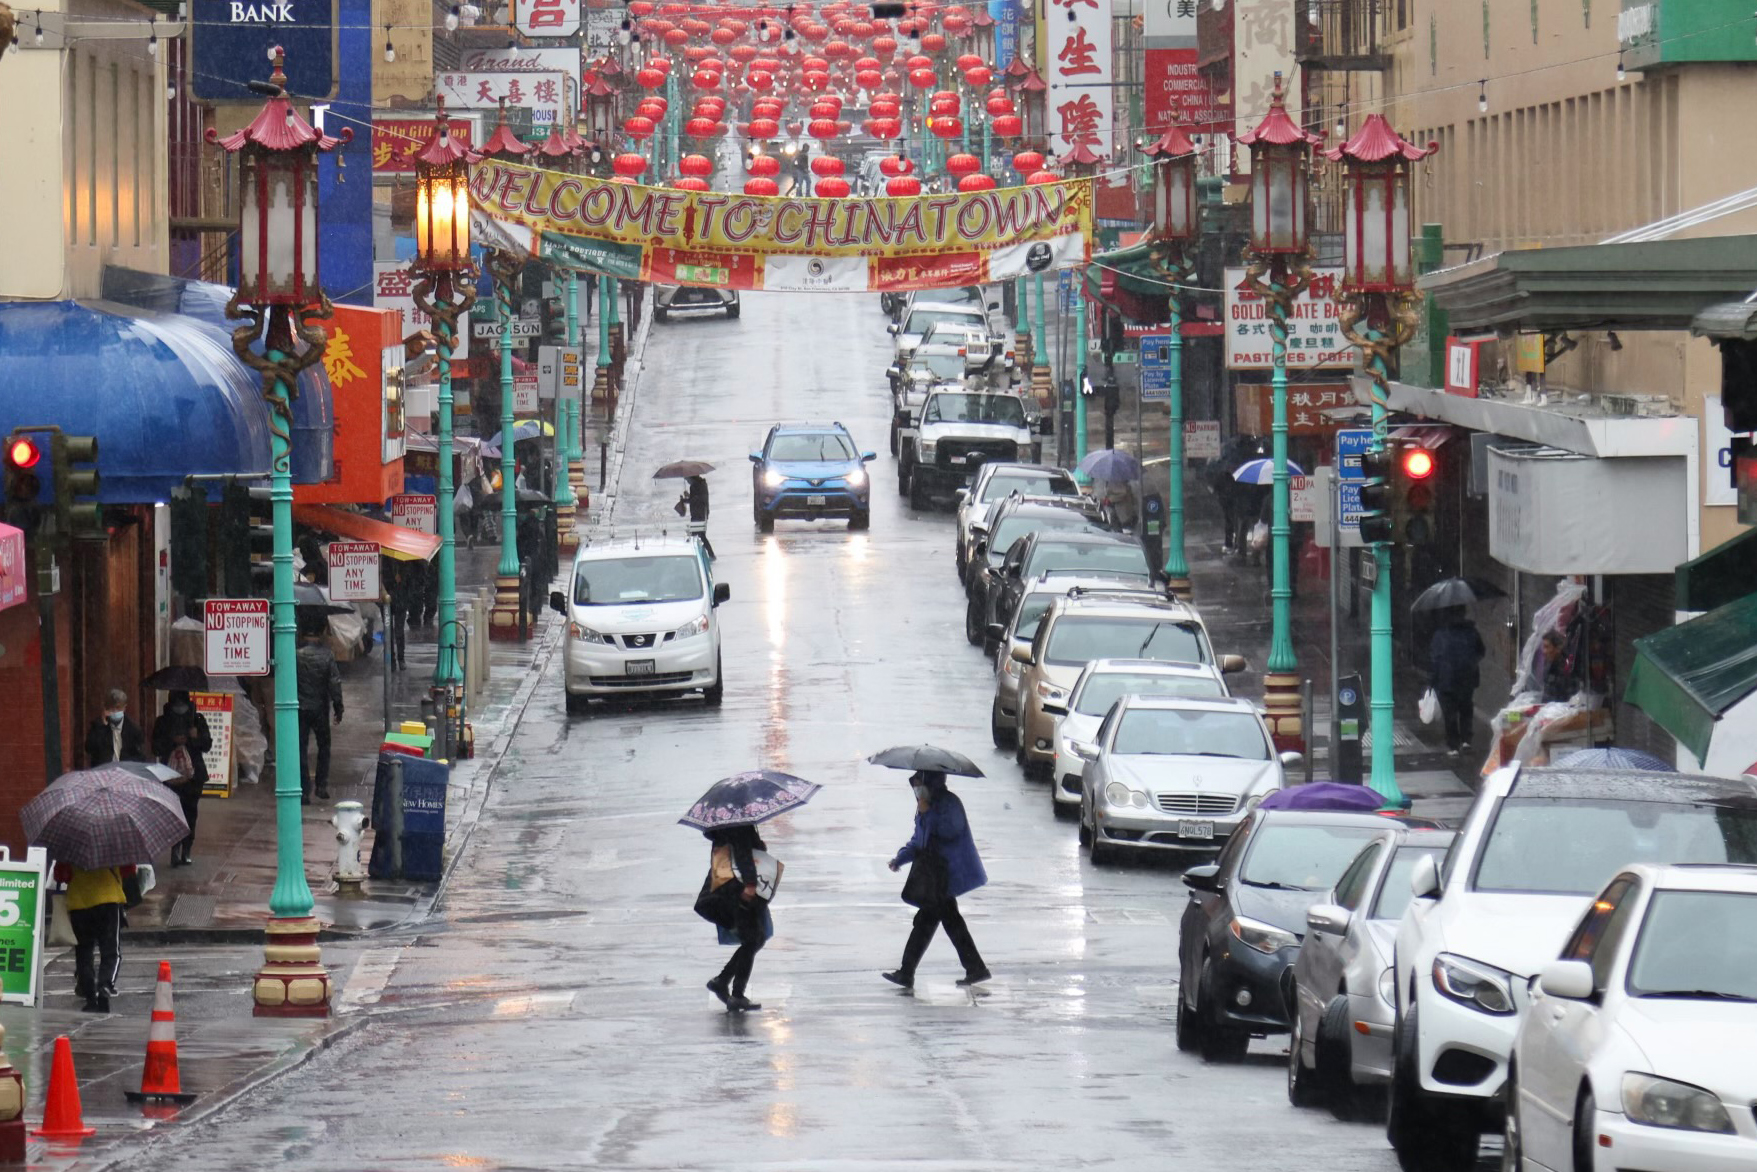 A rainy street in Chinatown with pedestrians holding umbrellas, lined with parked cars and red lanterns overhead.